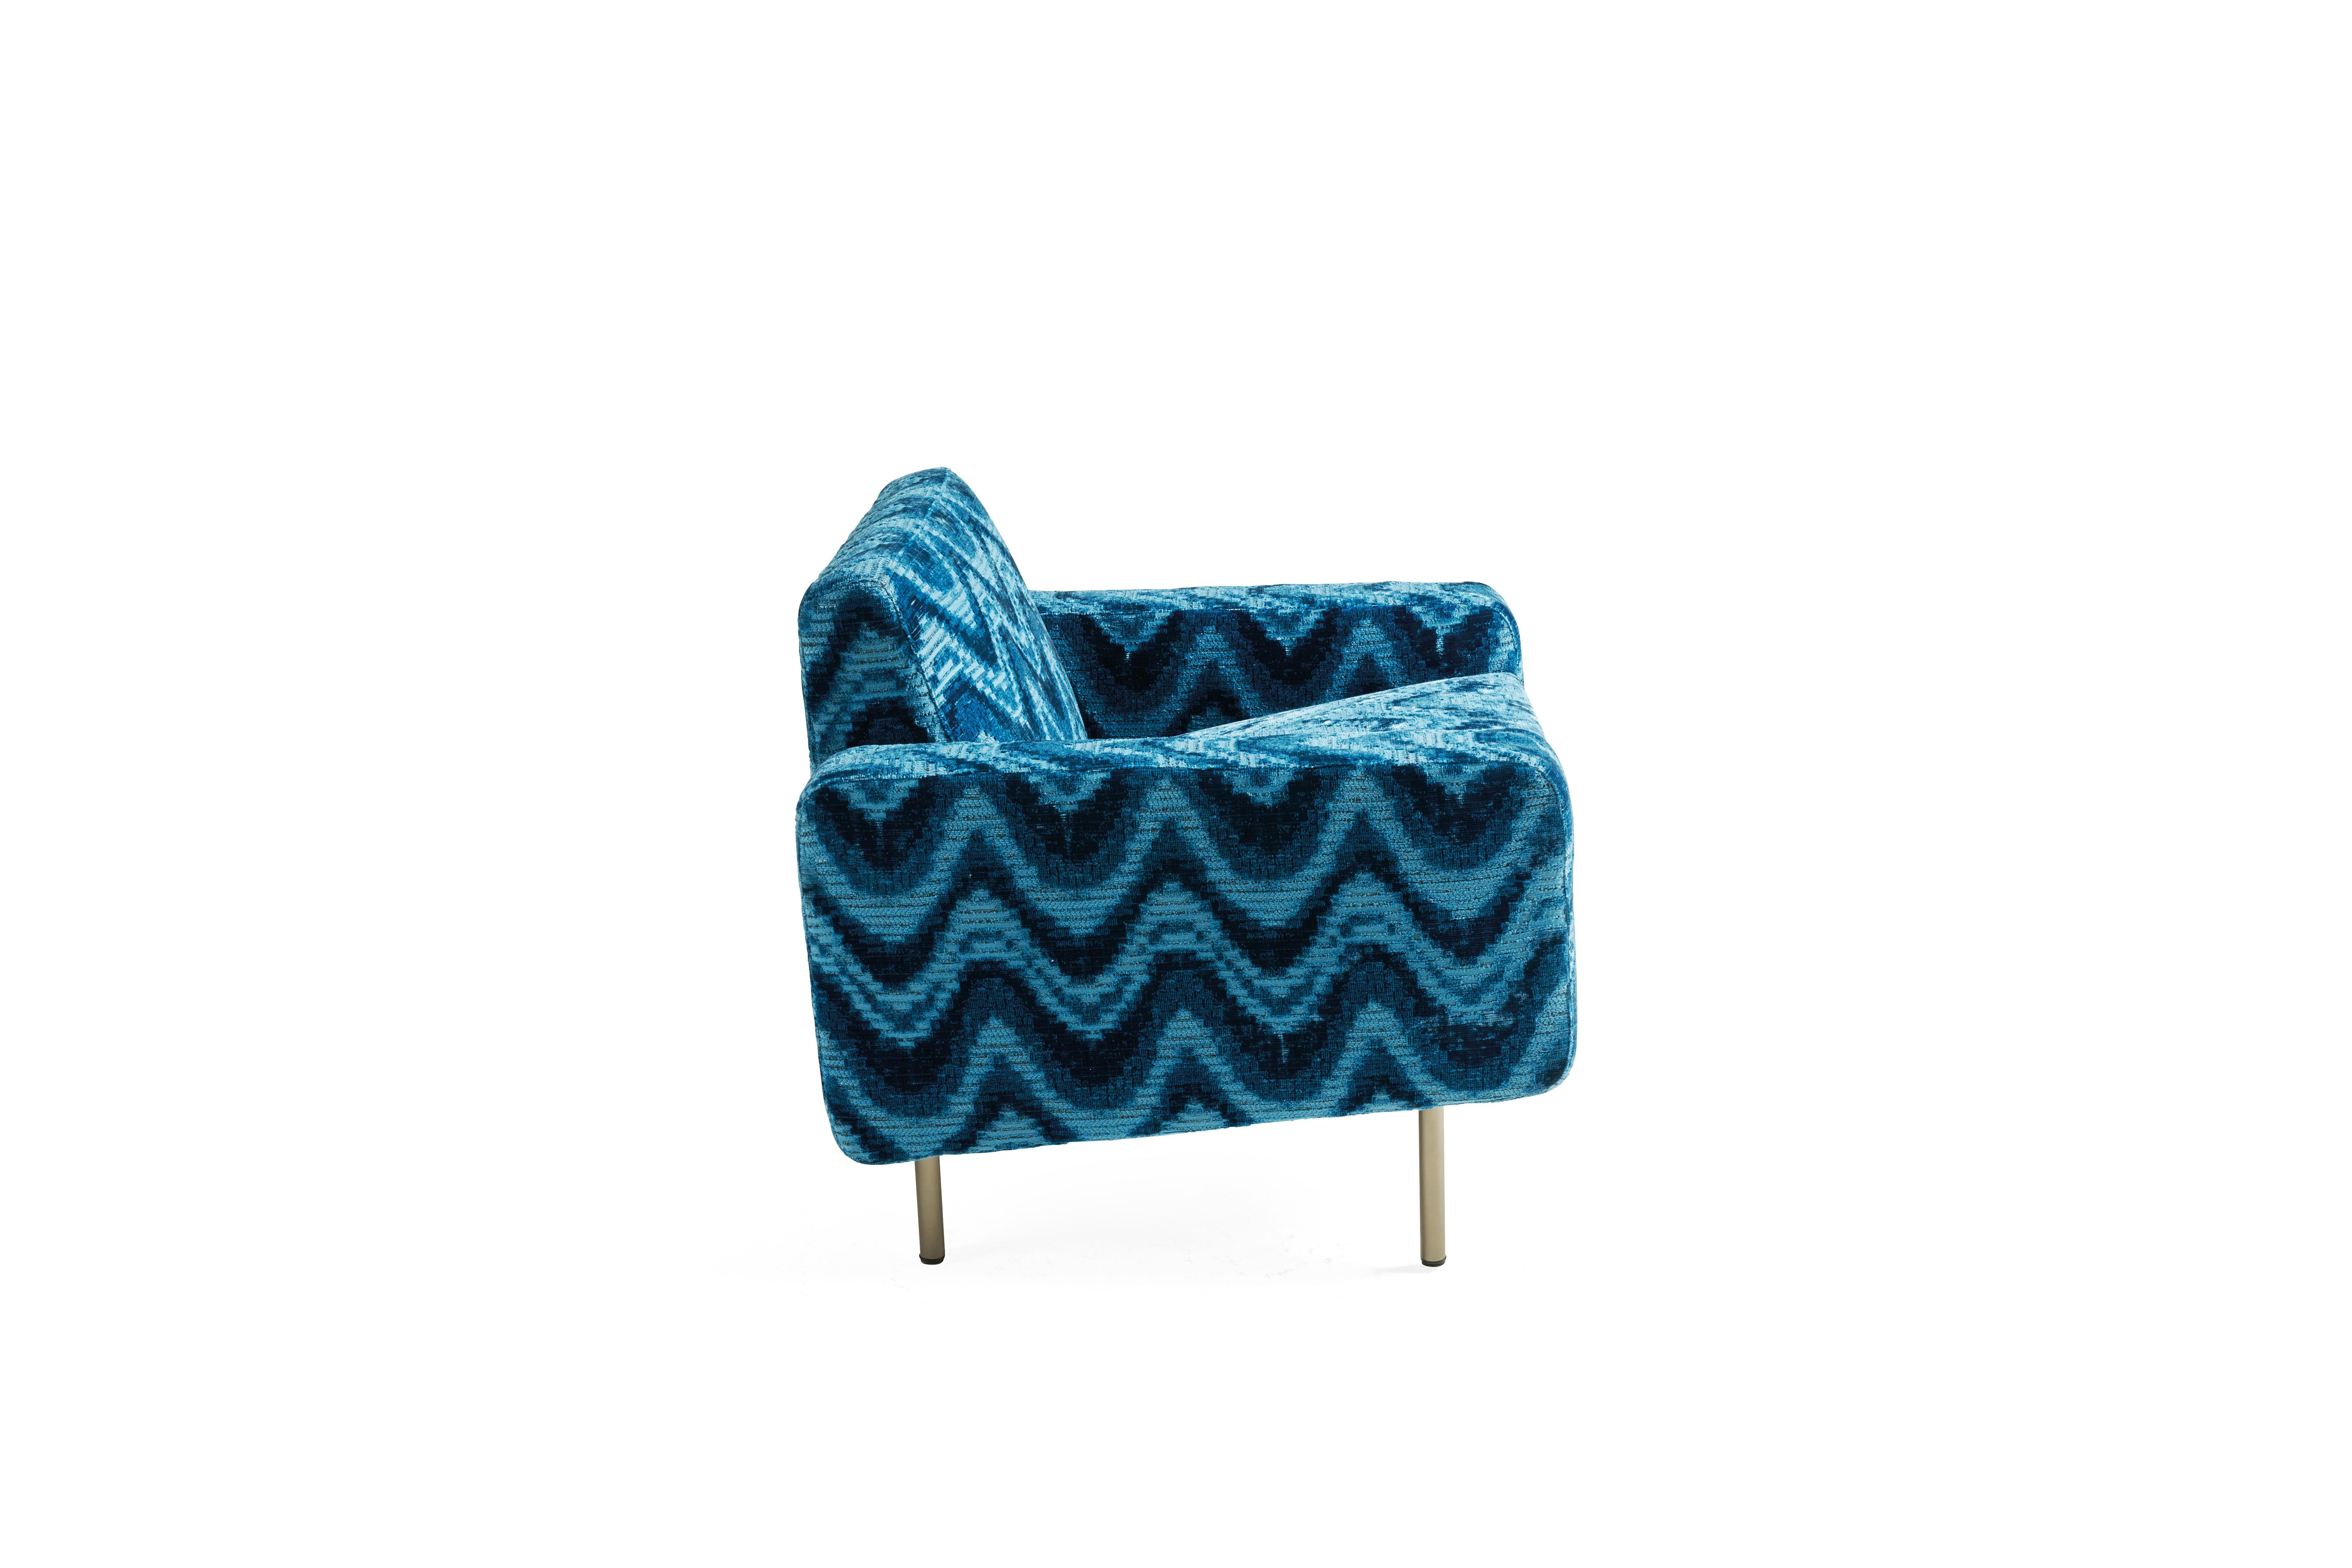 Modern 21st Century Type Armchair in Blue Jacquard Fabric by Etro Home Interiors For Sale